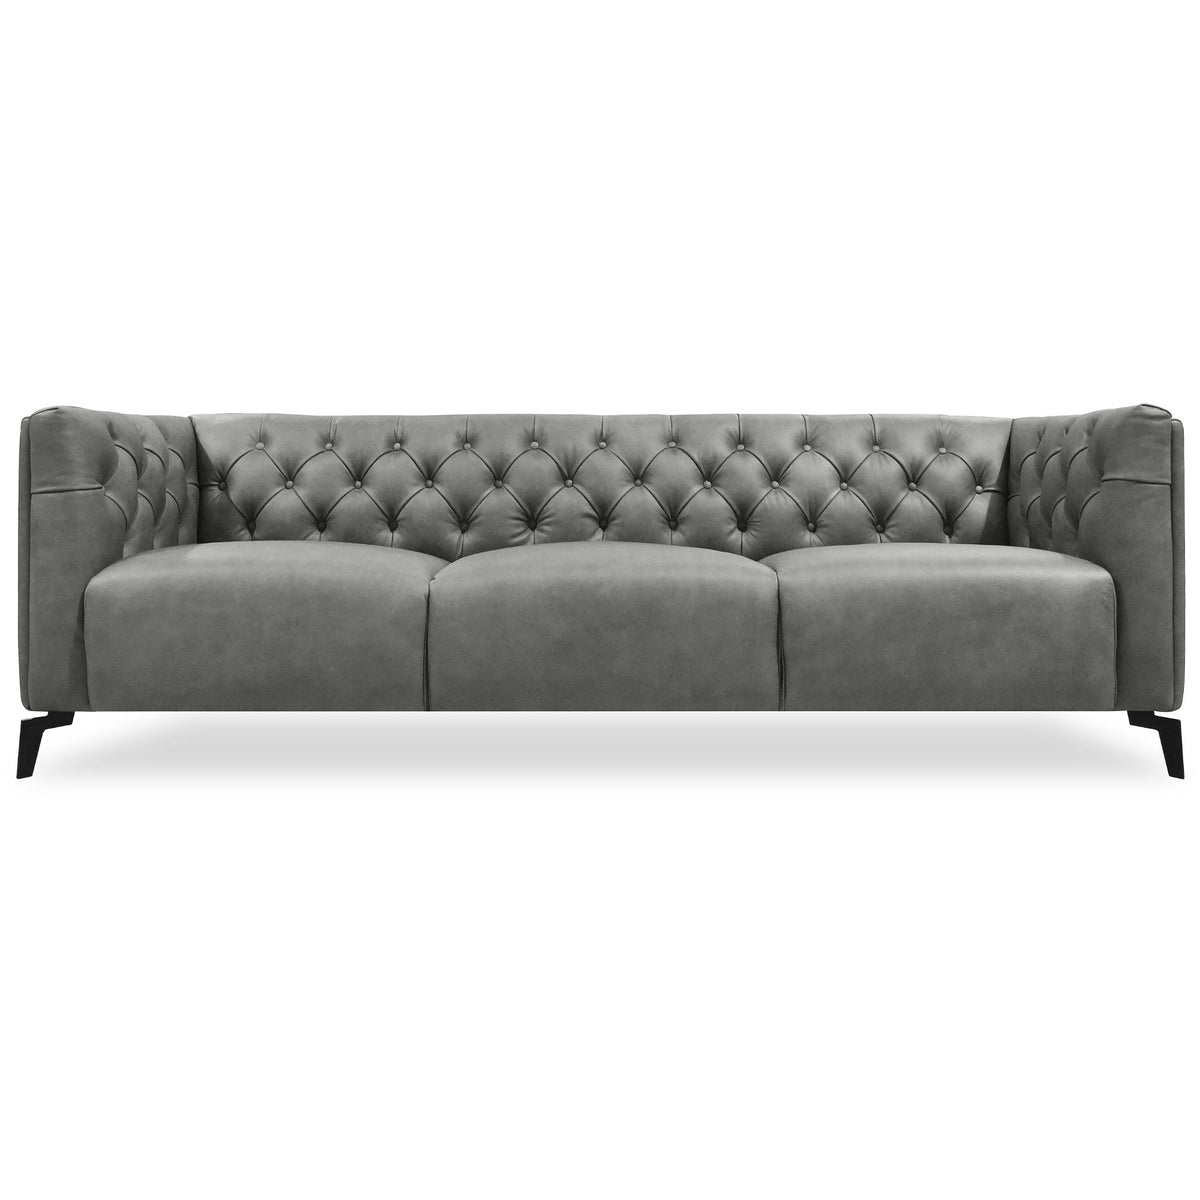 Luxe Genuine Forli Leather Sofa 3.5 Seater Upholstered Lounge Couch - Dark Grey.